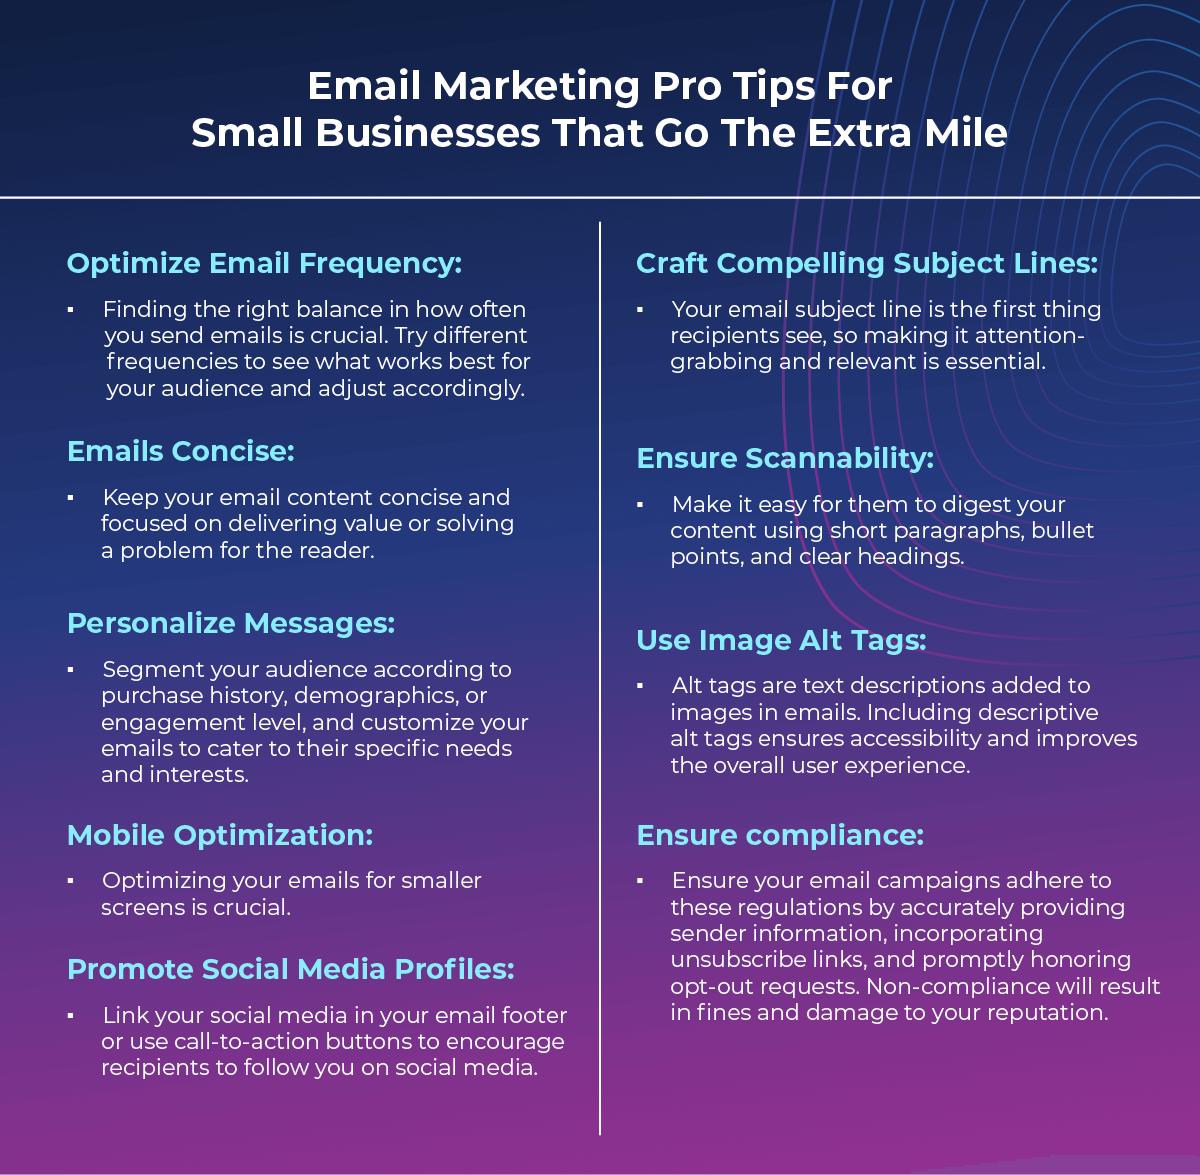 Pro email marketing tips for small businesses